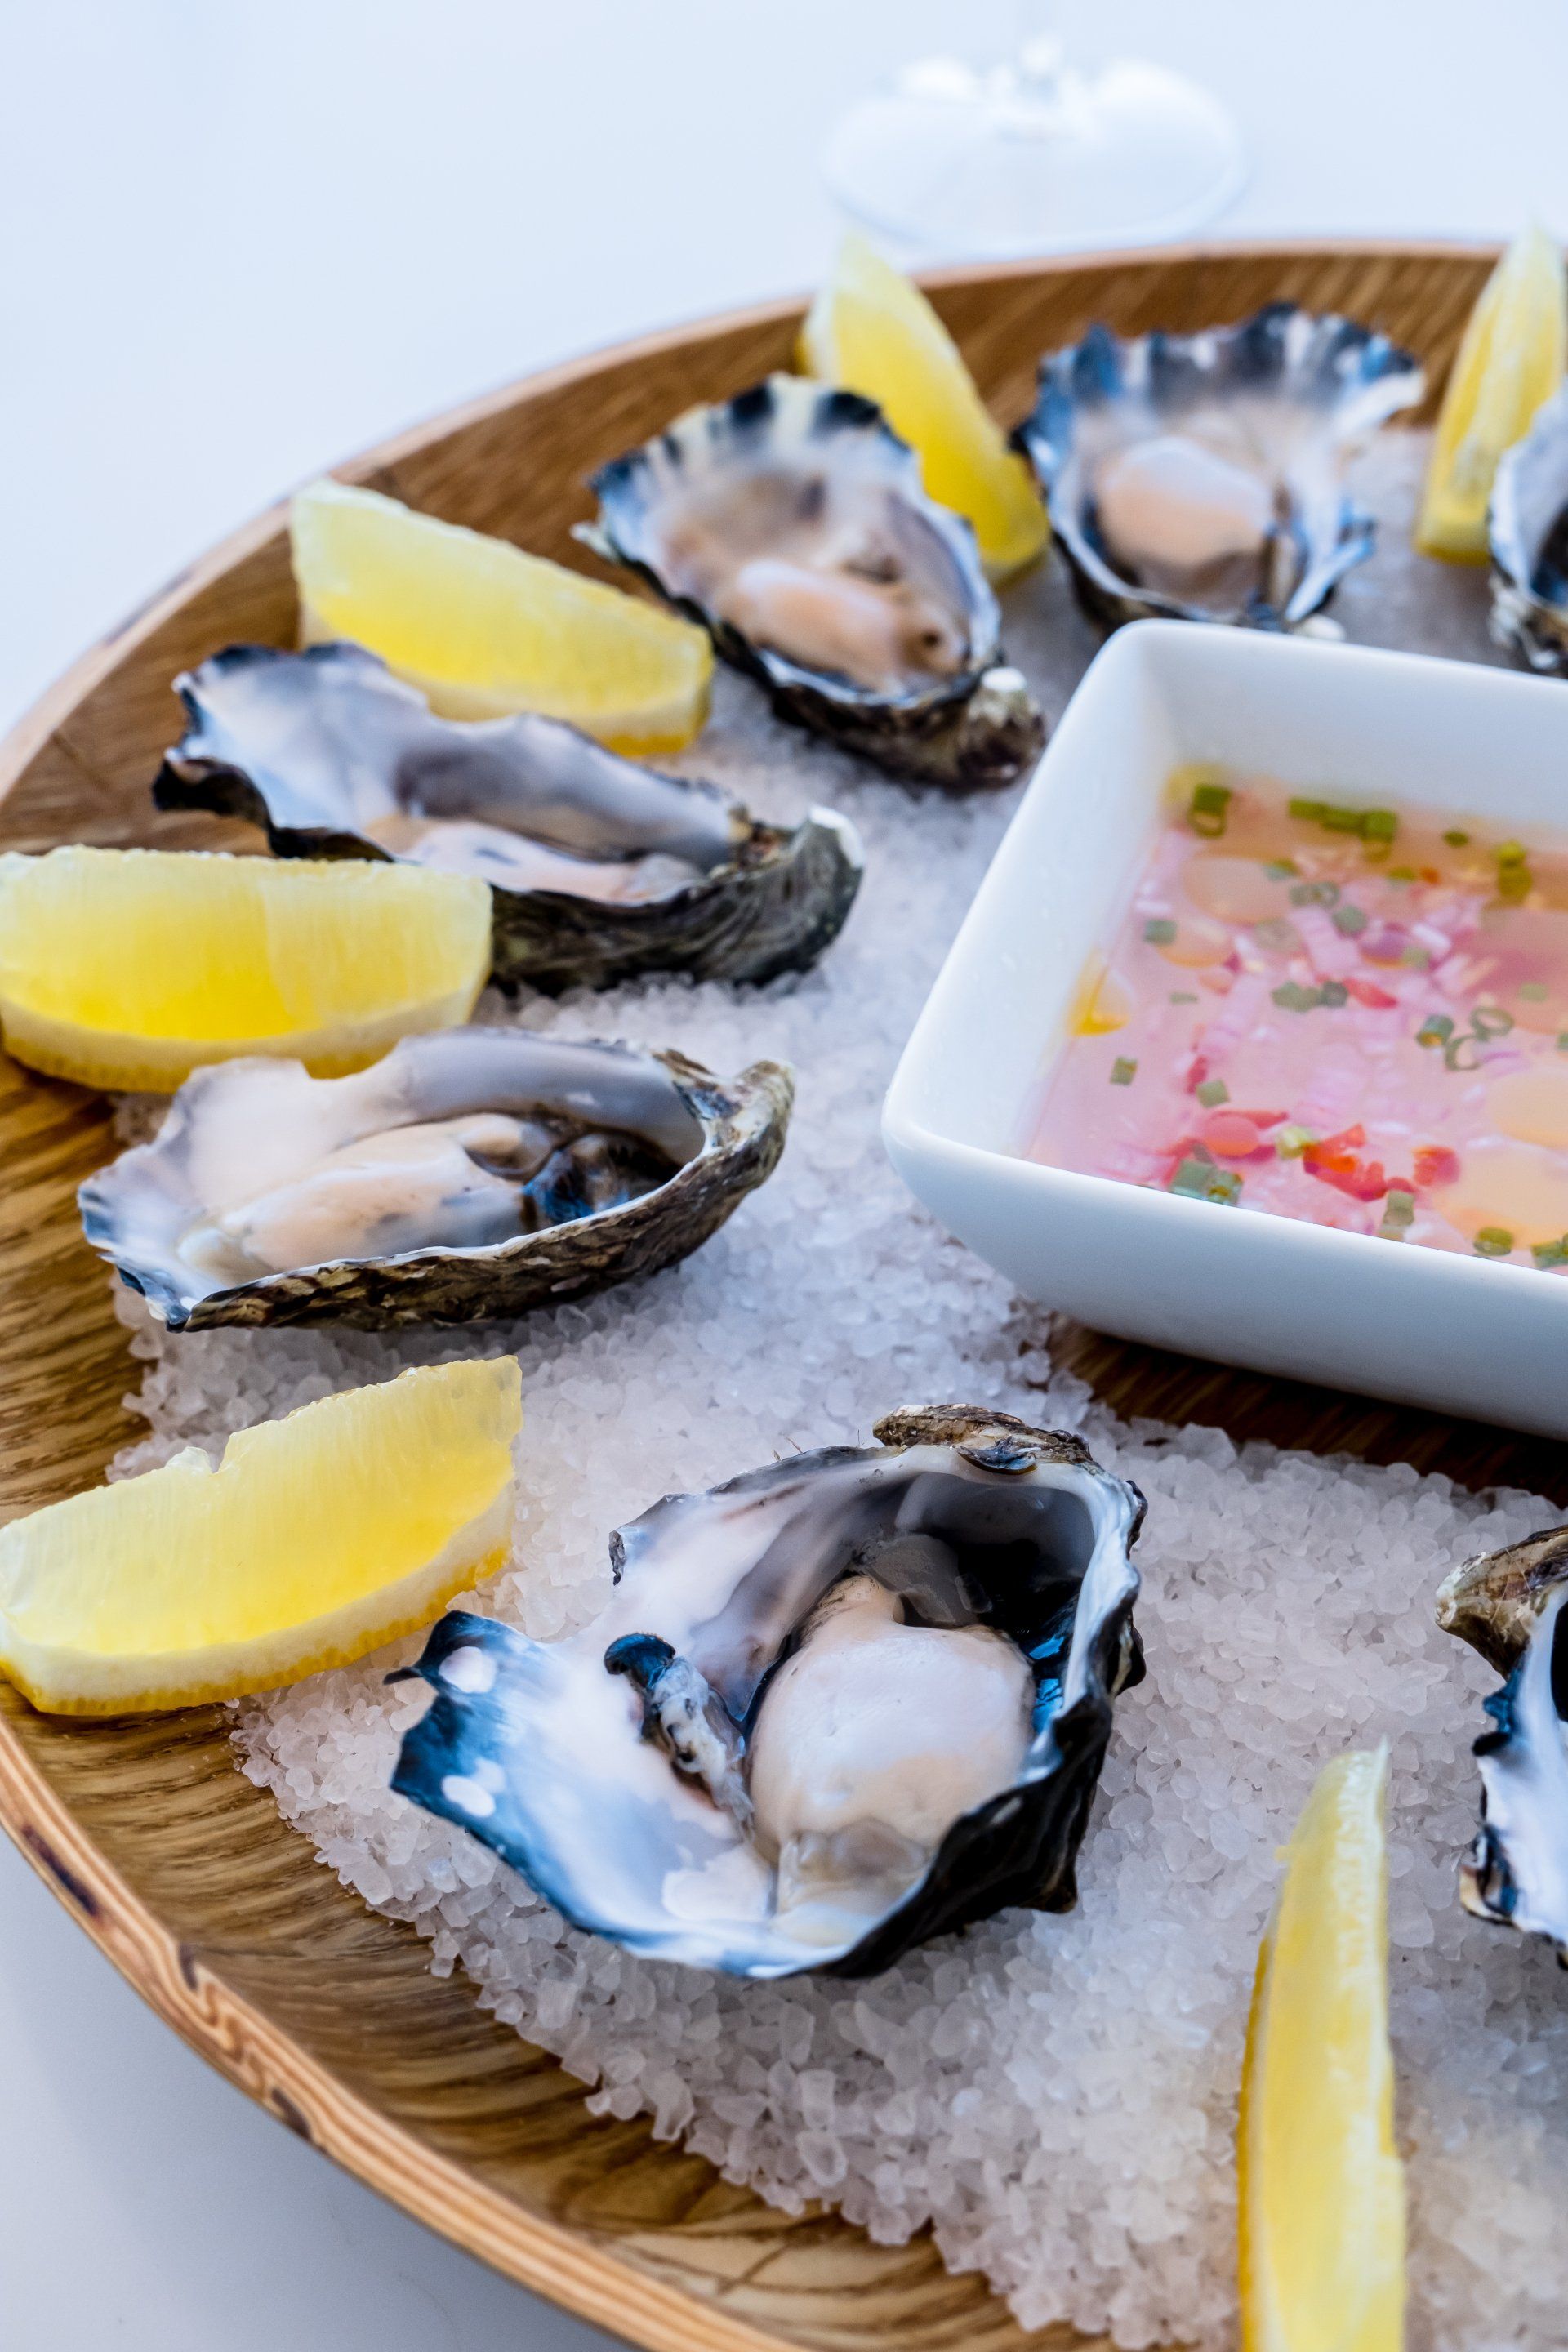 A plate of oysters with lemon slices and dipping sauce